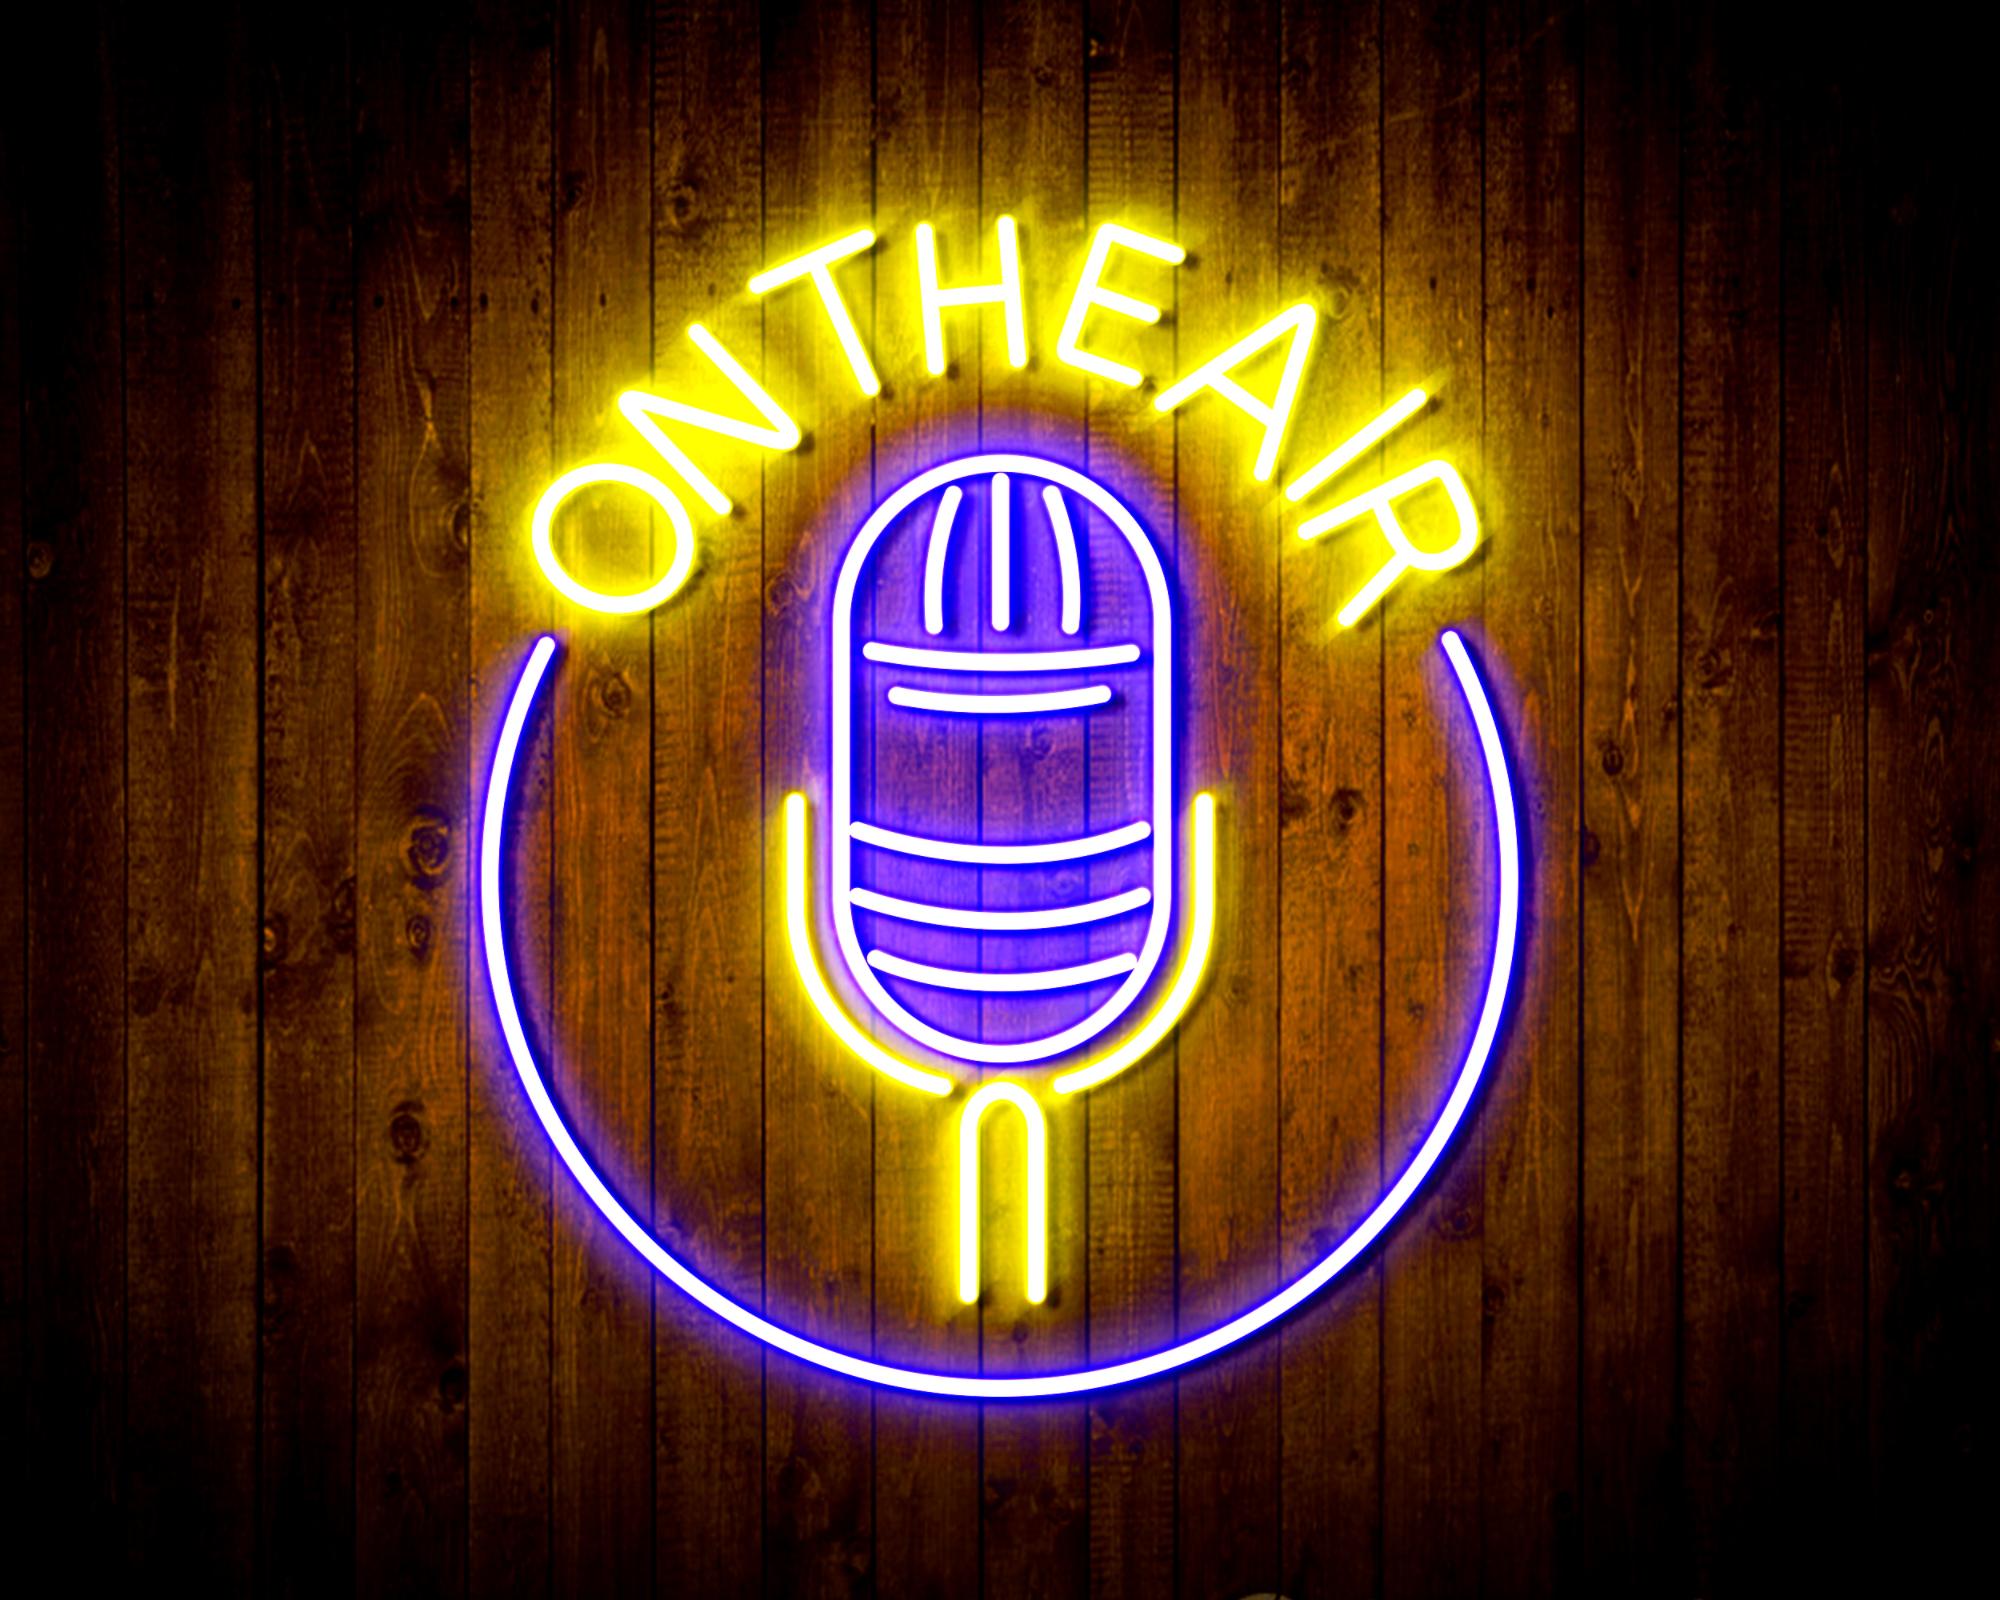 On the Air Microphone LED Neon Sign Wall Light